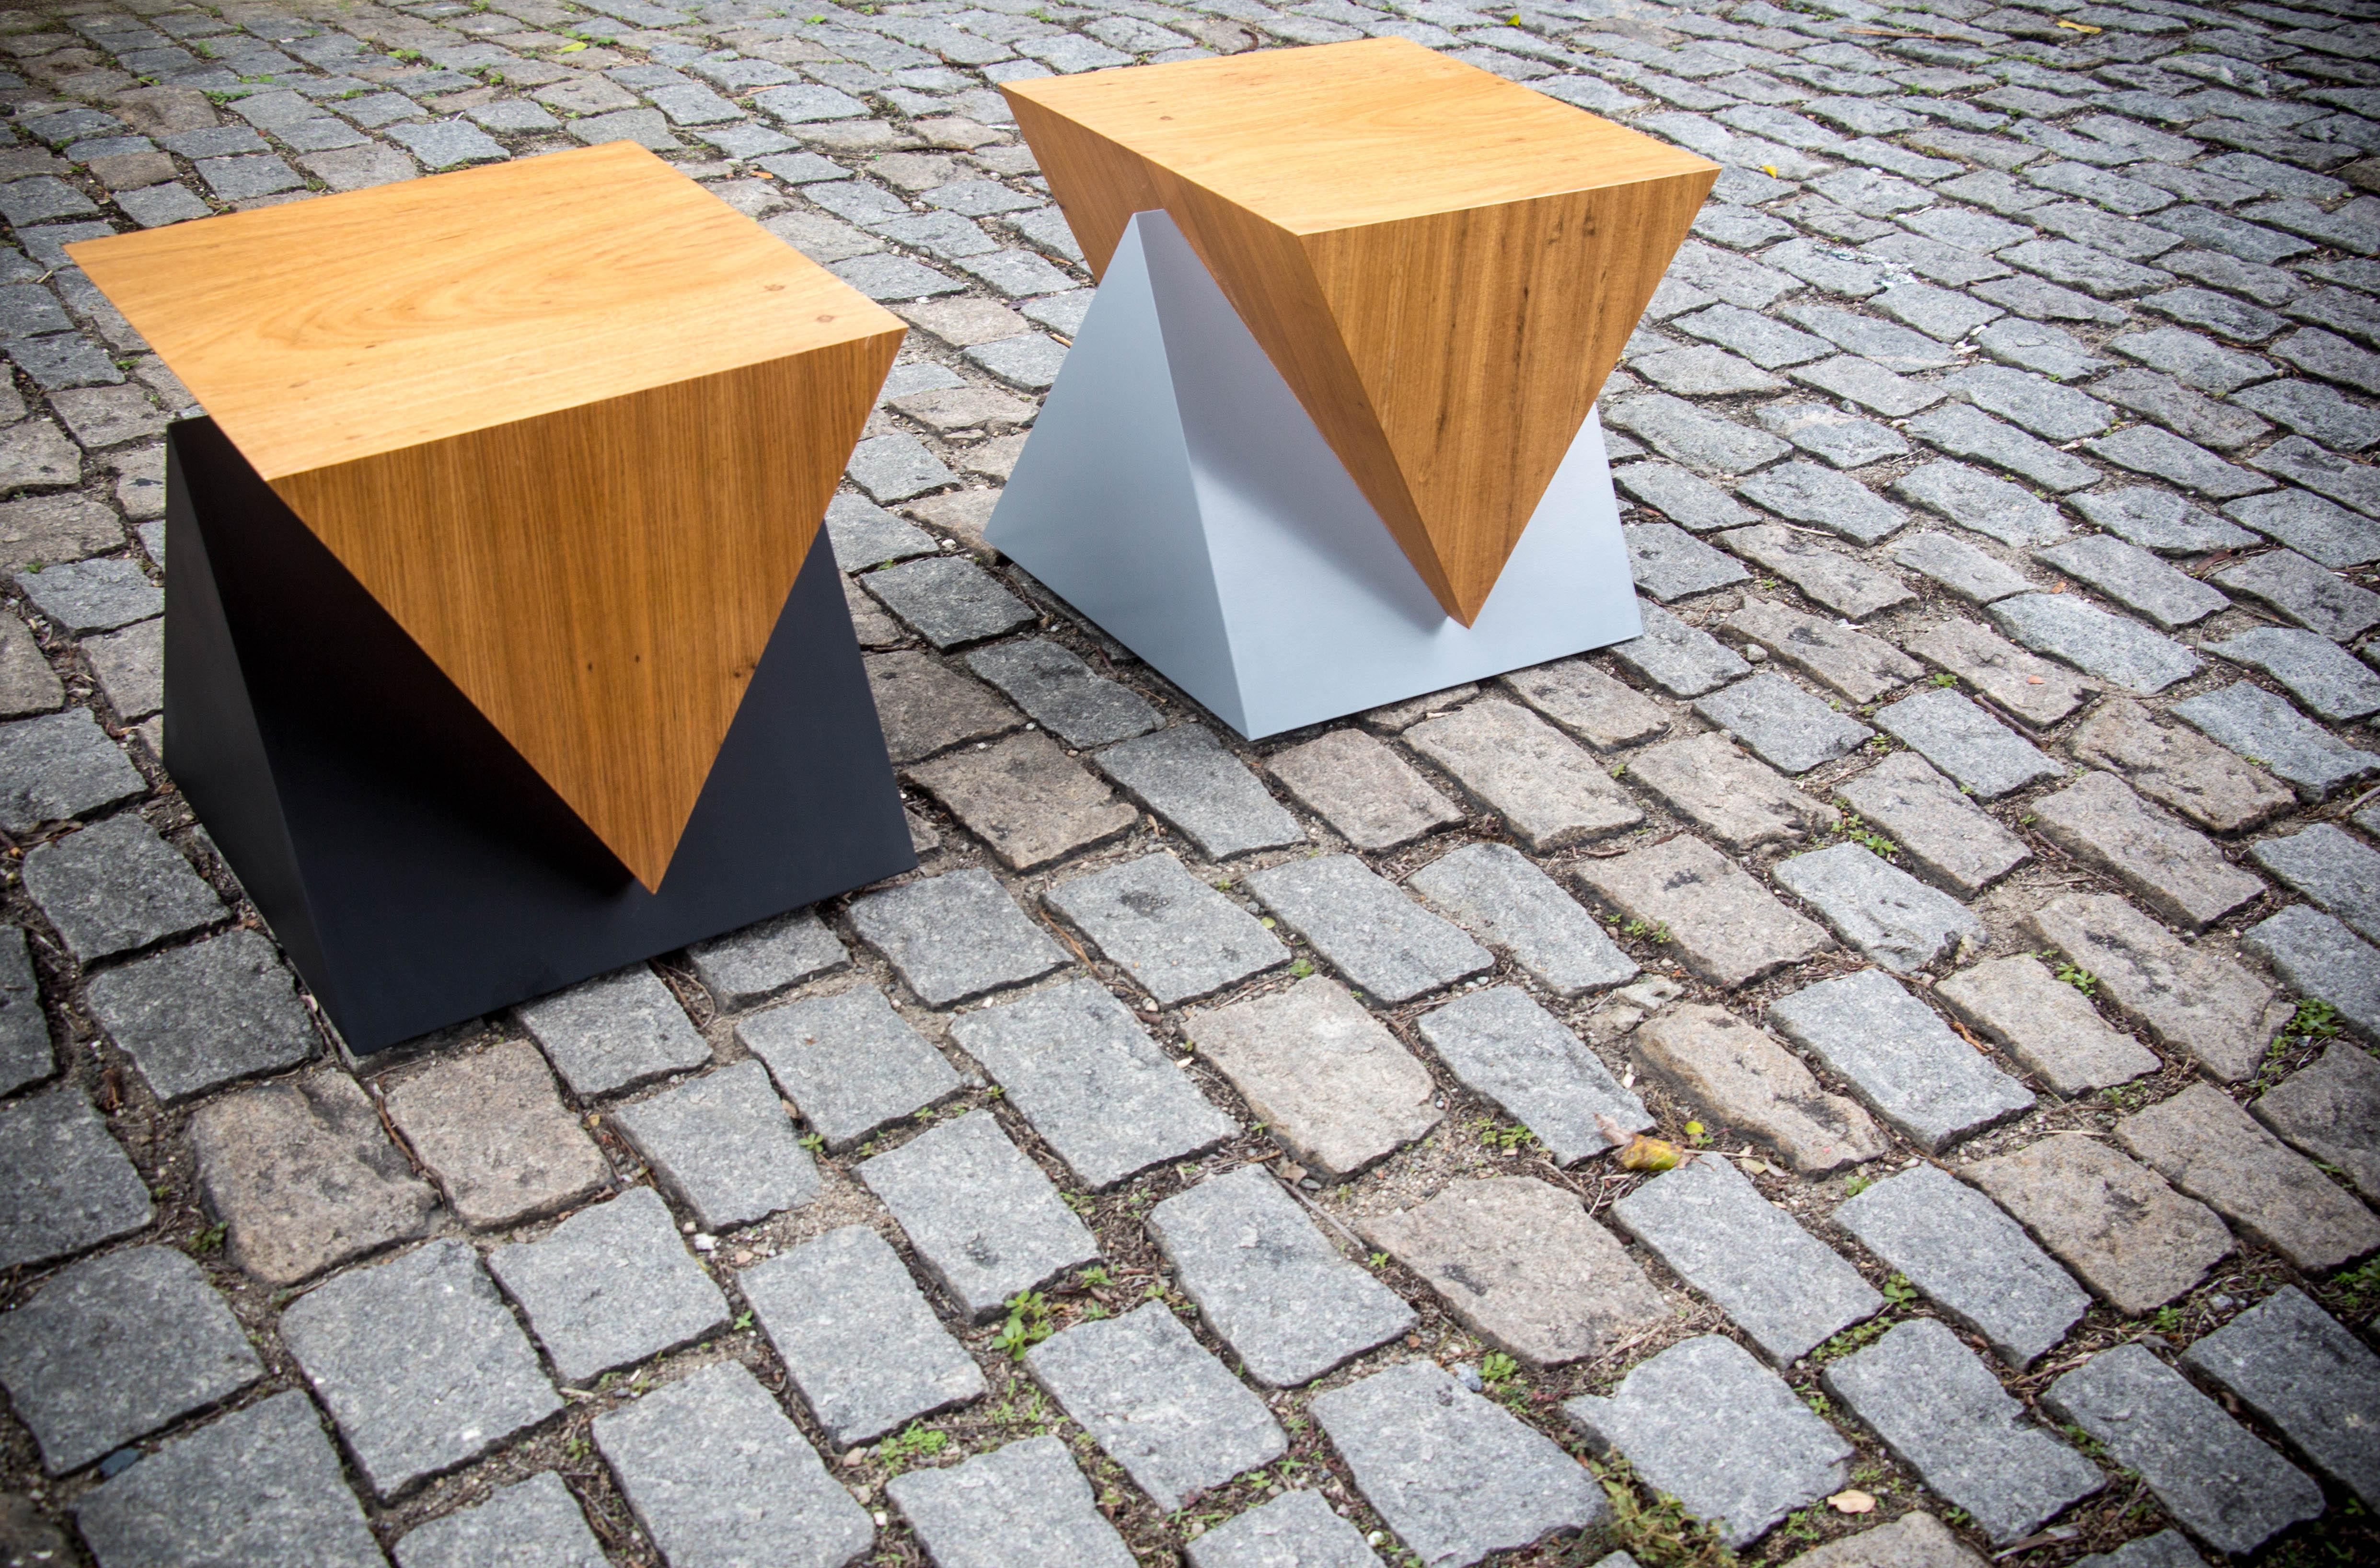 Minimalist piece made of freijó wood veneer and lacquered wood. 
It has multiple functionality: A single piece can be used as a bench, side table or base for glass top. In two pieces, it can be used as coffee table.